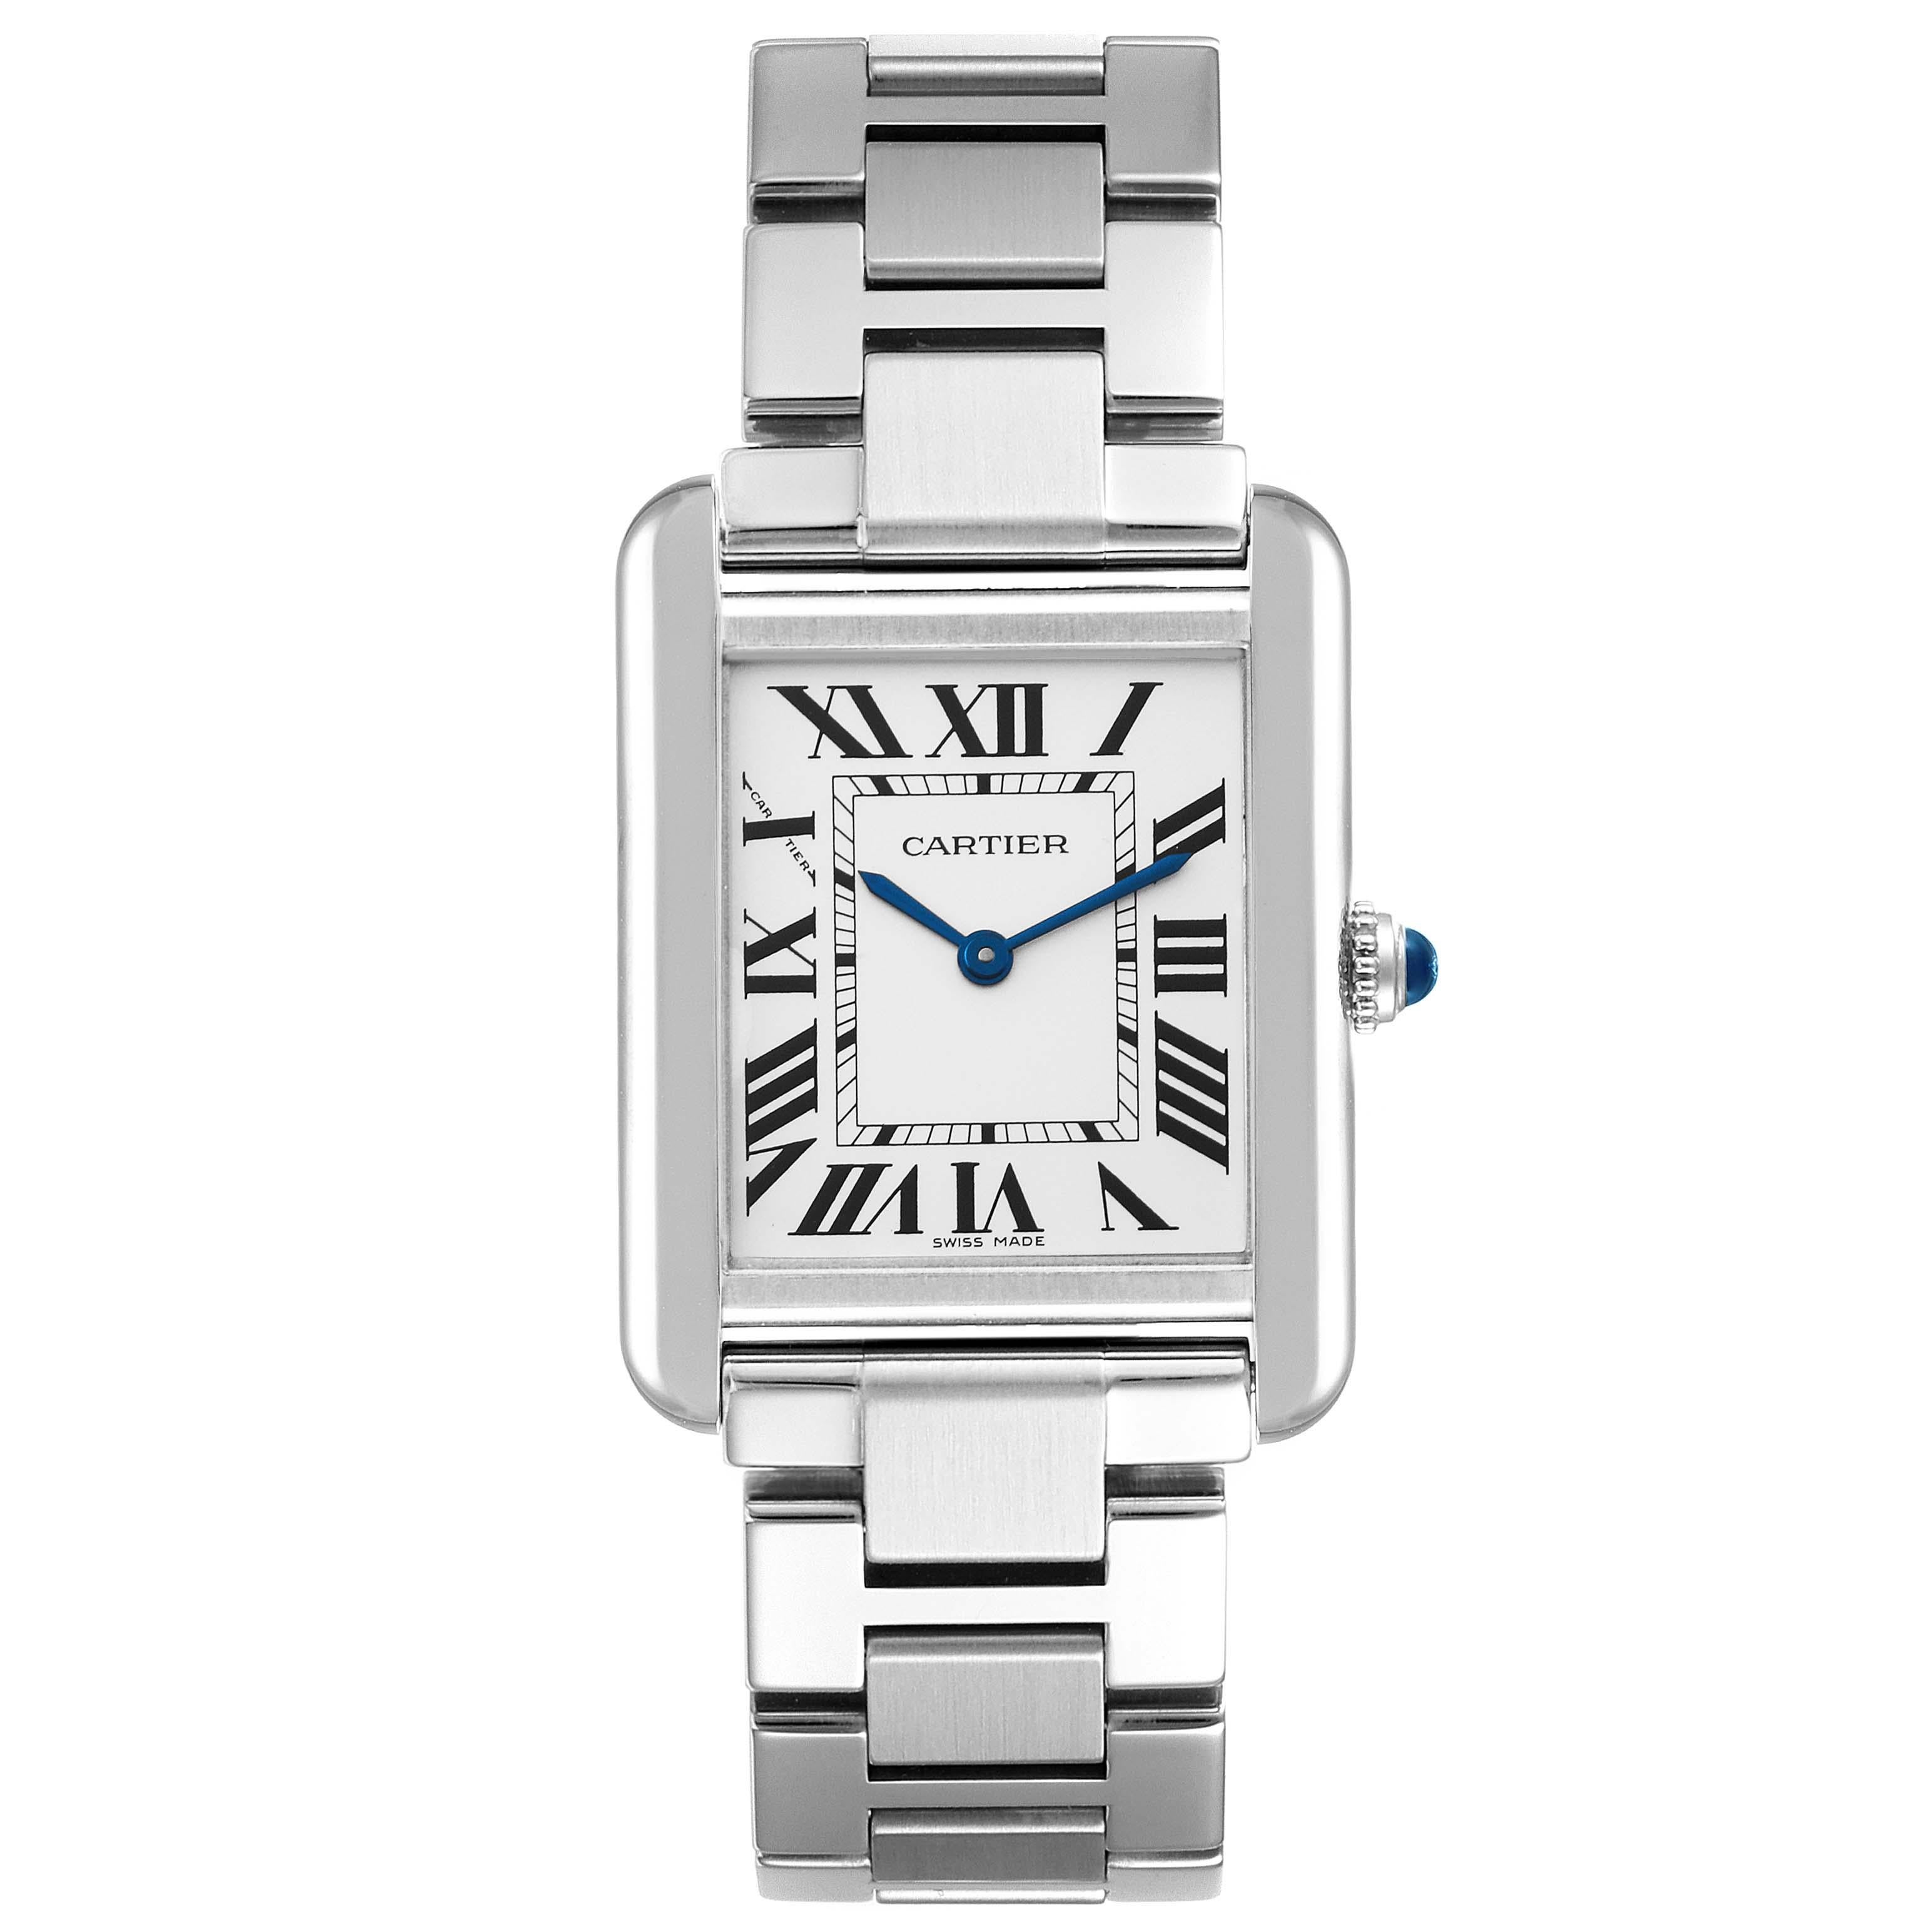 Cartier Tank Solo Small Silver Dial Steel Ladies Watch W5200013 Box Card. Quartz movement. Stainless steel case 31 x 24 mm. Circular grained crown set with a blue spinel cabochon. . Scratch resistant sapphire crystal. Silver opaline dial with black